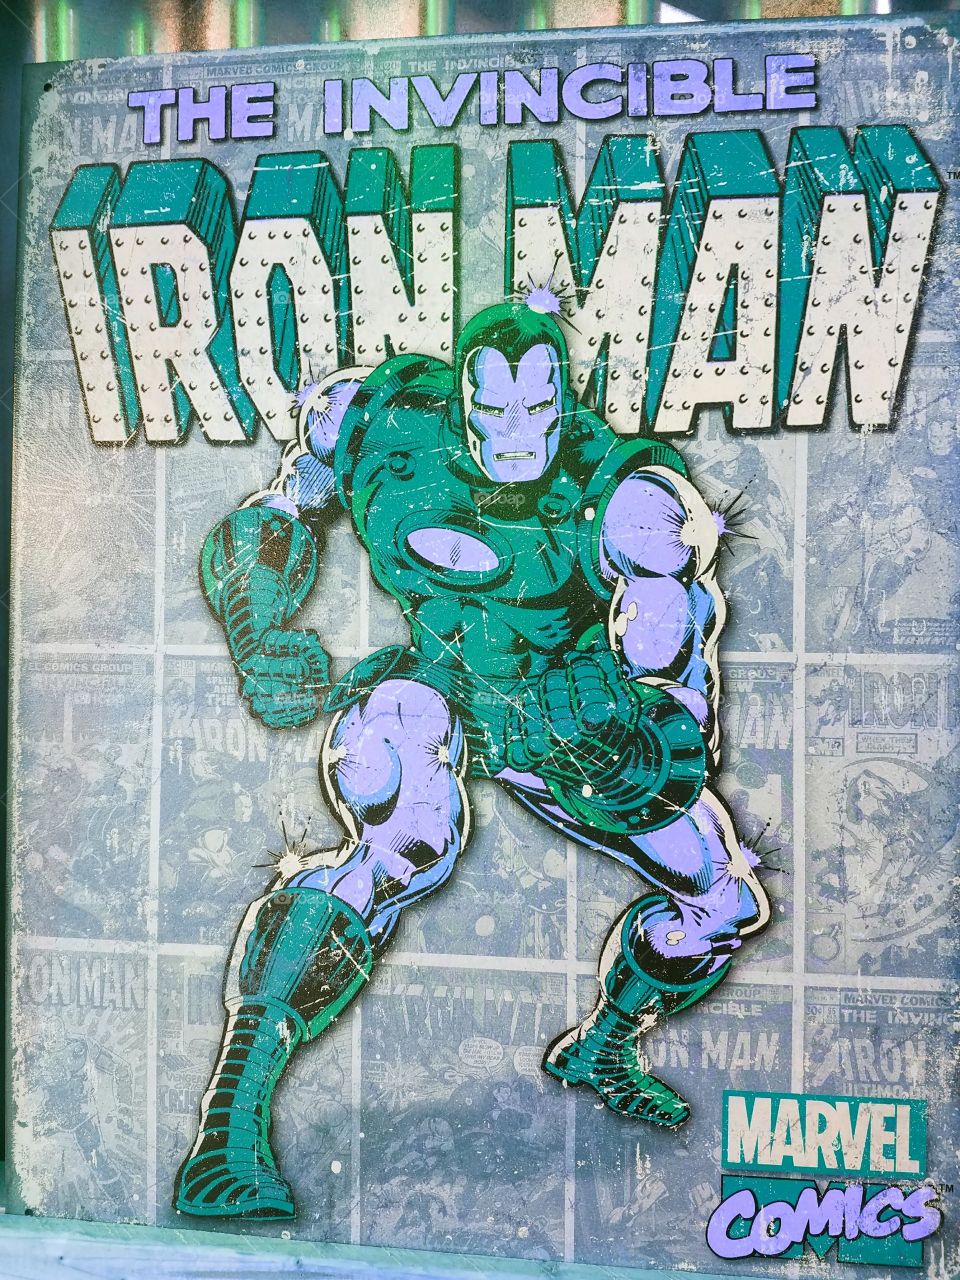 The Invincible Iron Man - Marvel Comics.  Blue and Lavender Colors.